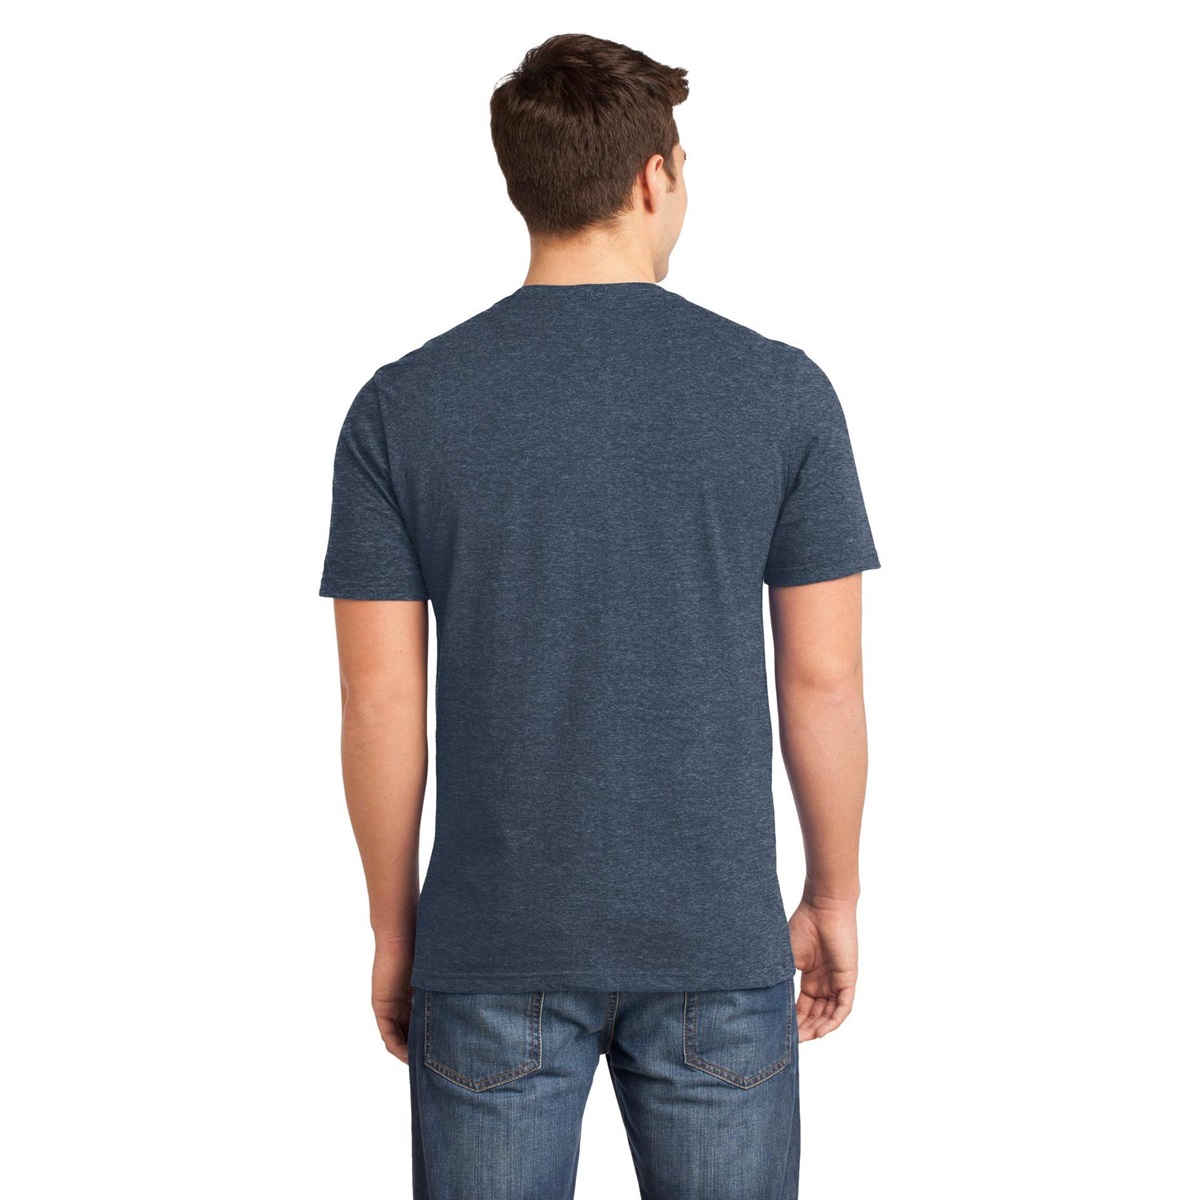 District DT6000 Young Mens Very Important Tee - Heathered Navy ...